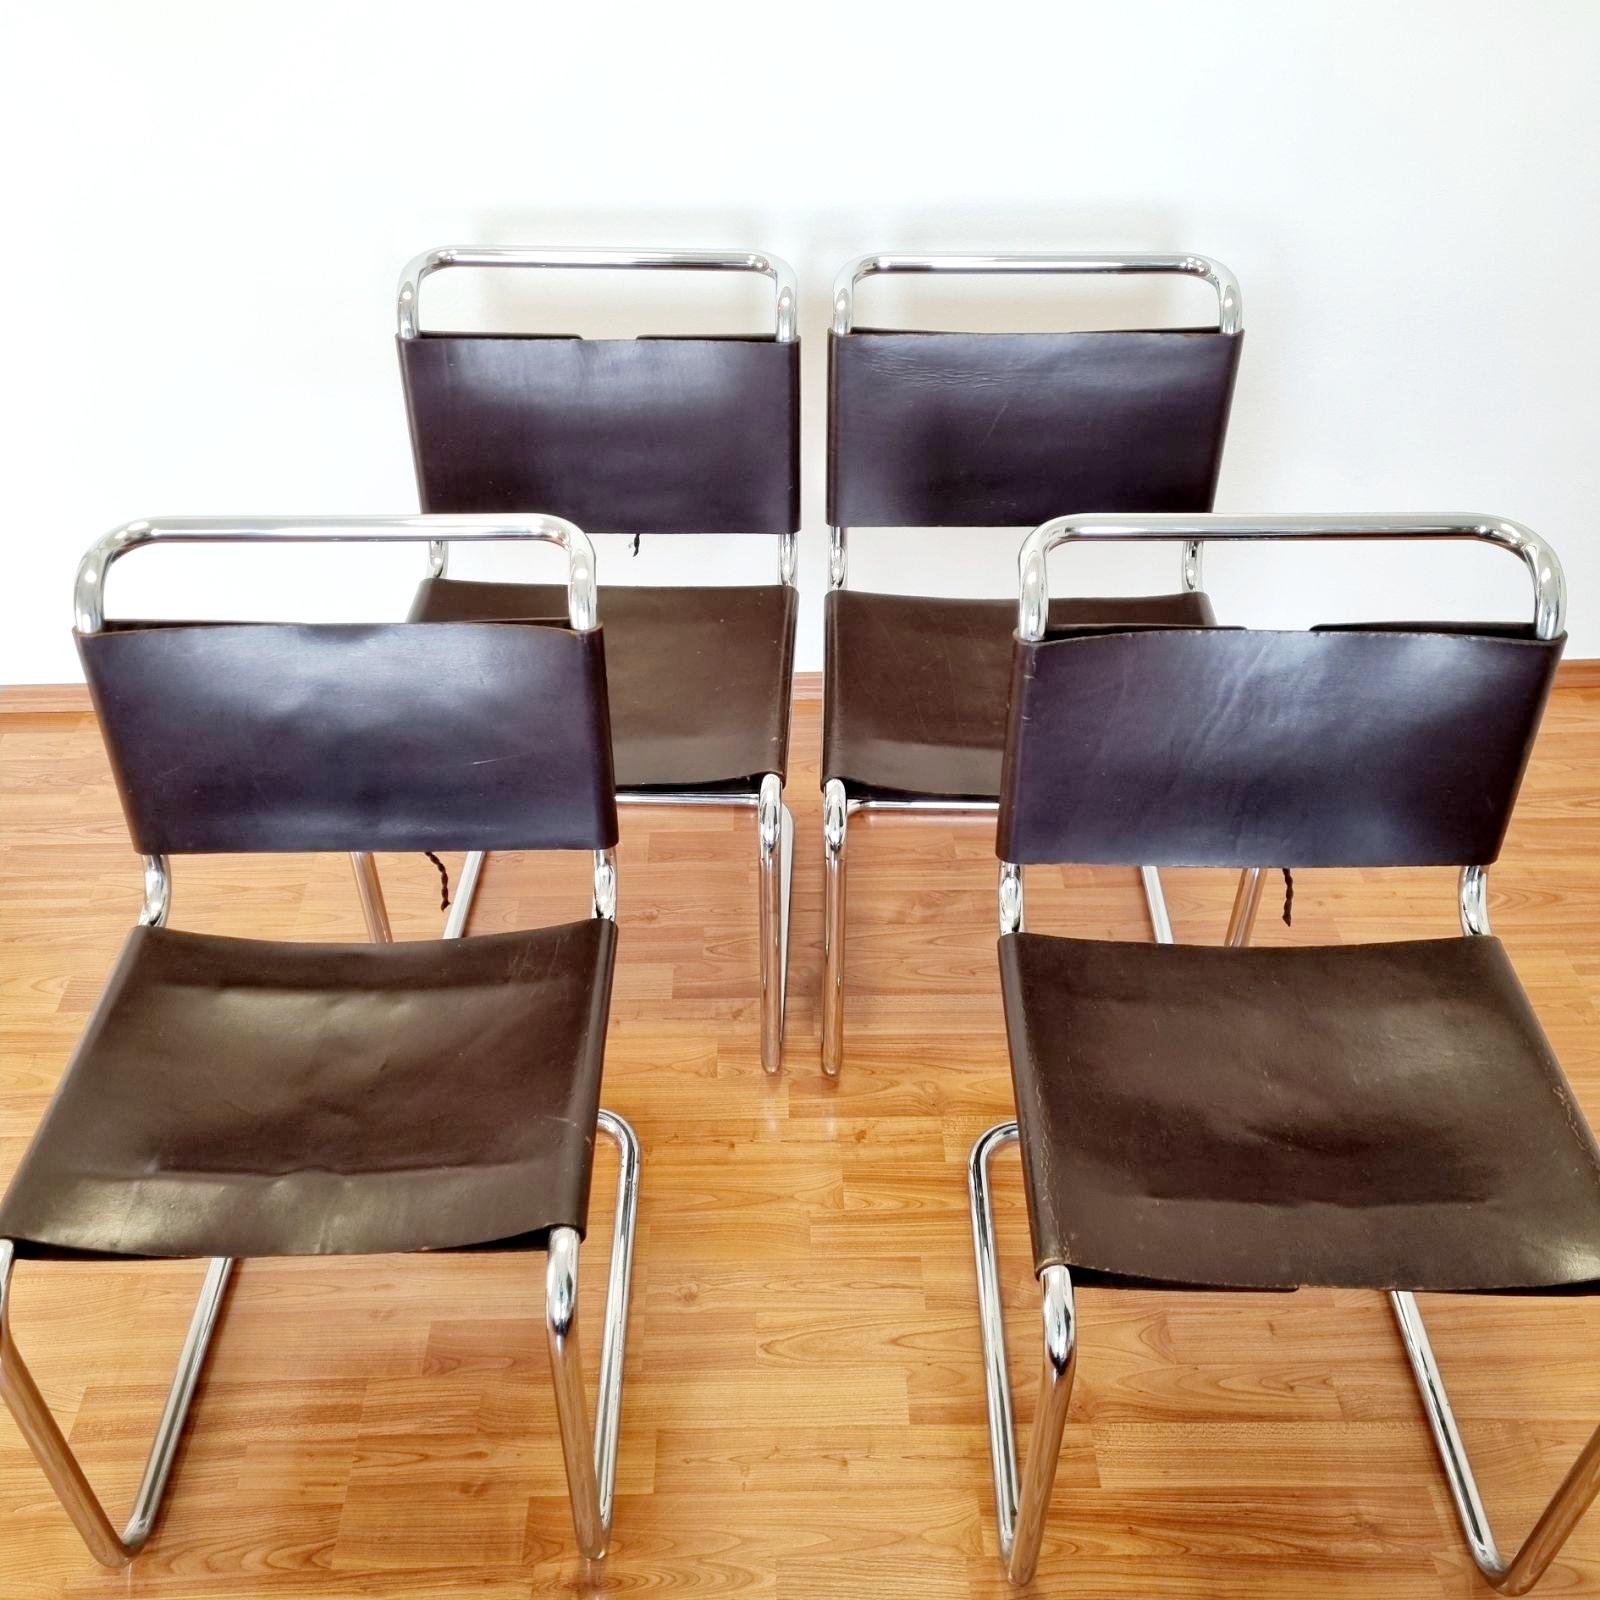 Set of 4 chairs B33 designed by Marcel Breuer in dark brown leather. Produced by Gavina in the 60s.

They are in good vintage condition with minor traces of age, as visible on photos.